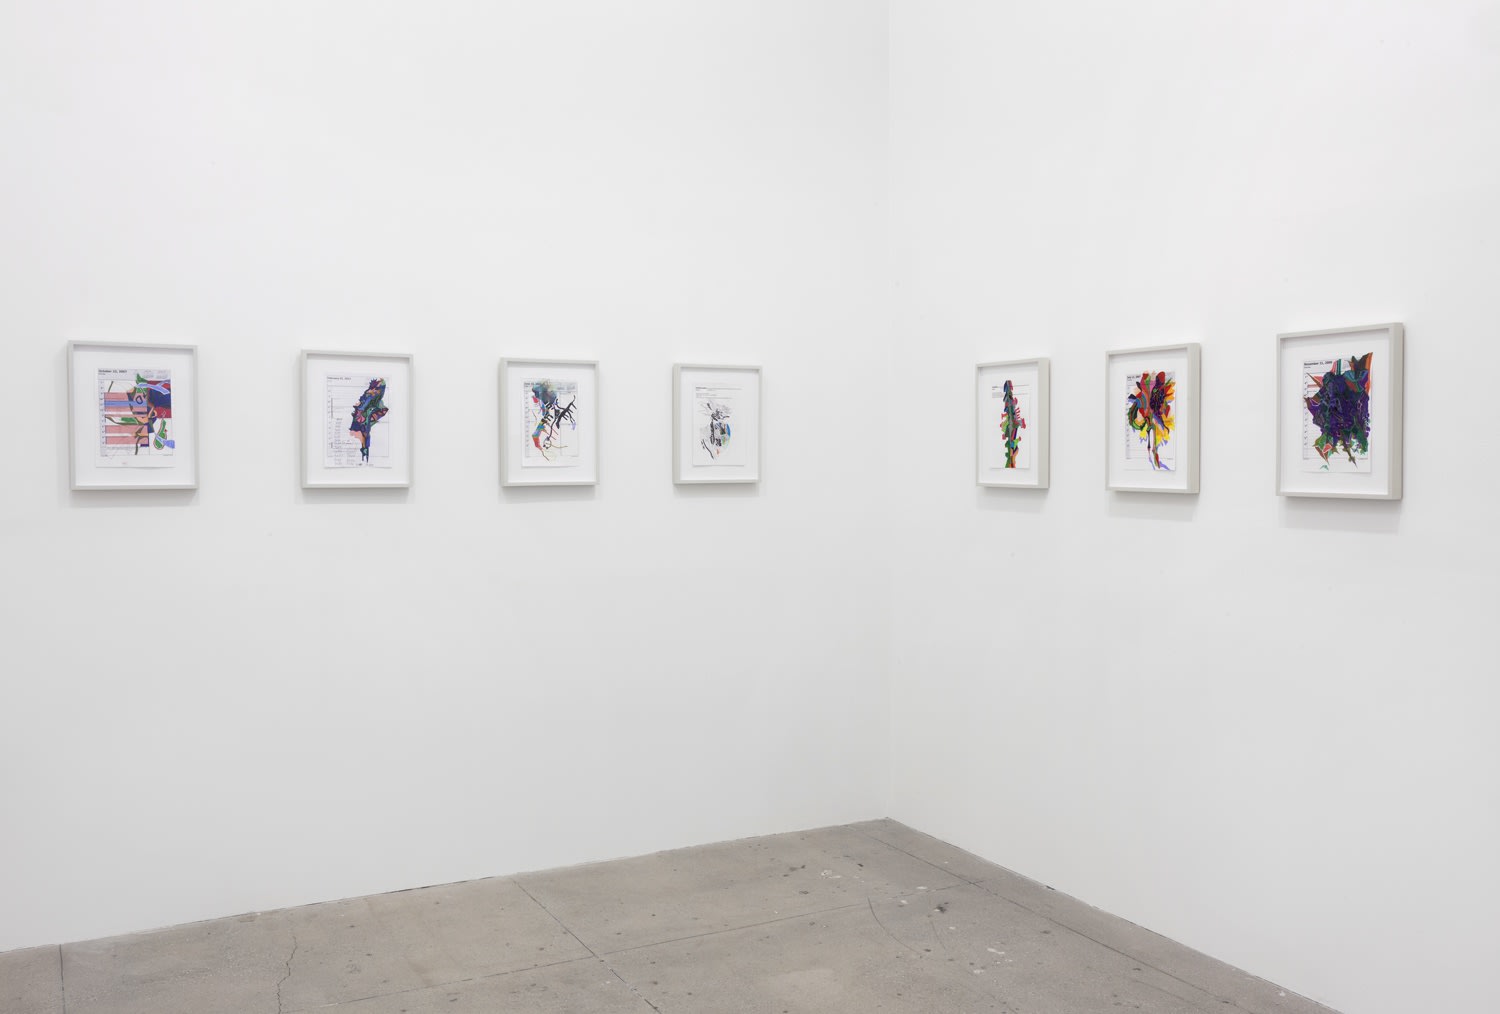 7 small, colorful artworks hang in white frames in a white gallery space.